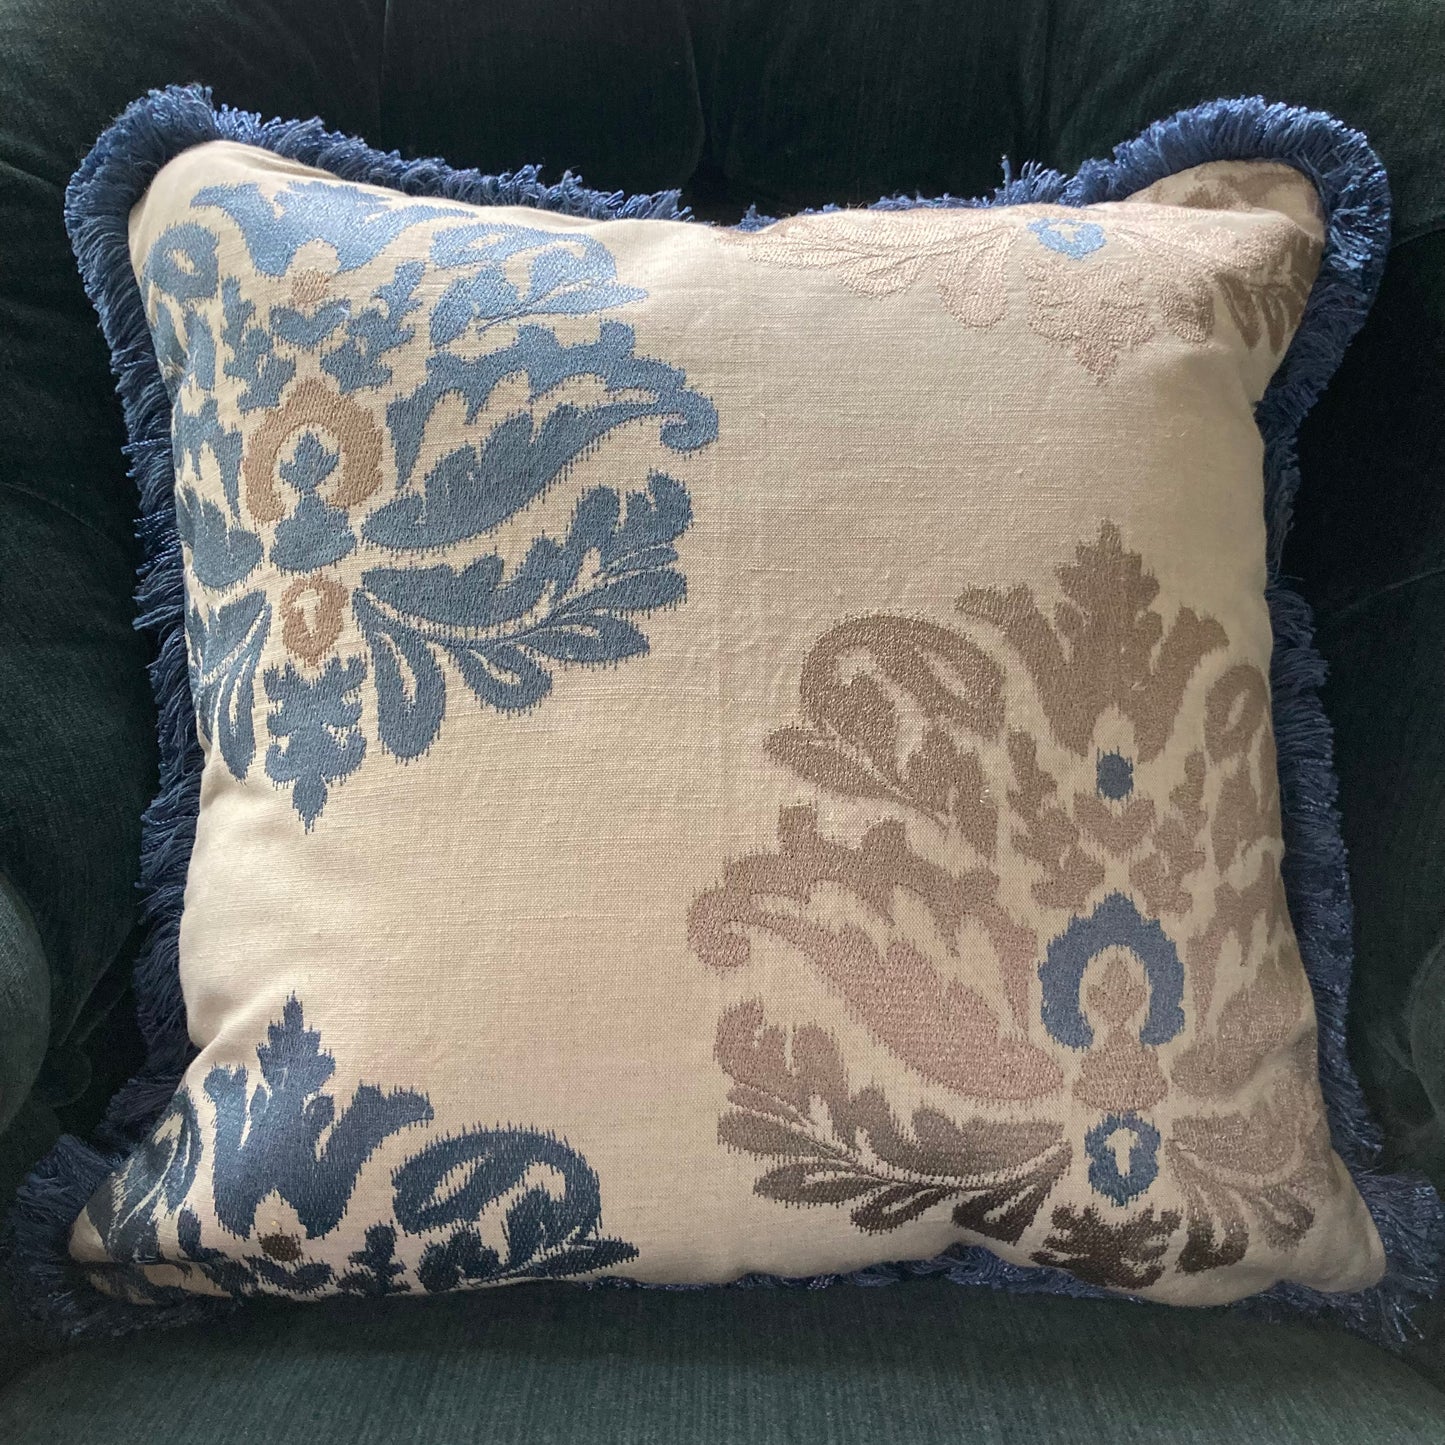 Amara Lapis Blue Medallions Linen 16 x 16 Square Designer Pillow Front with Down Feather Insert